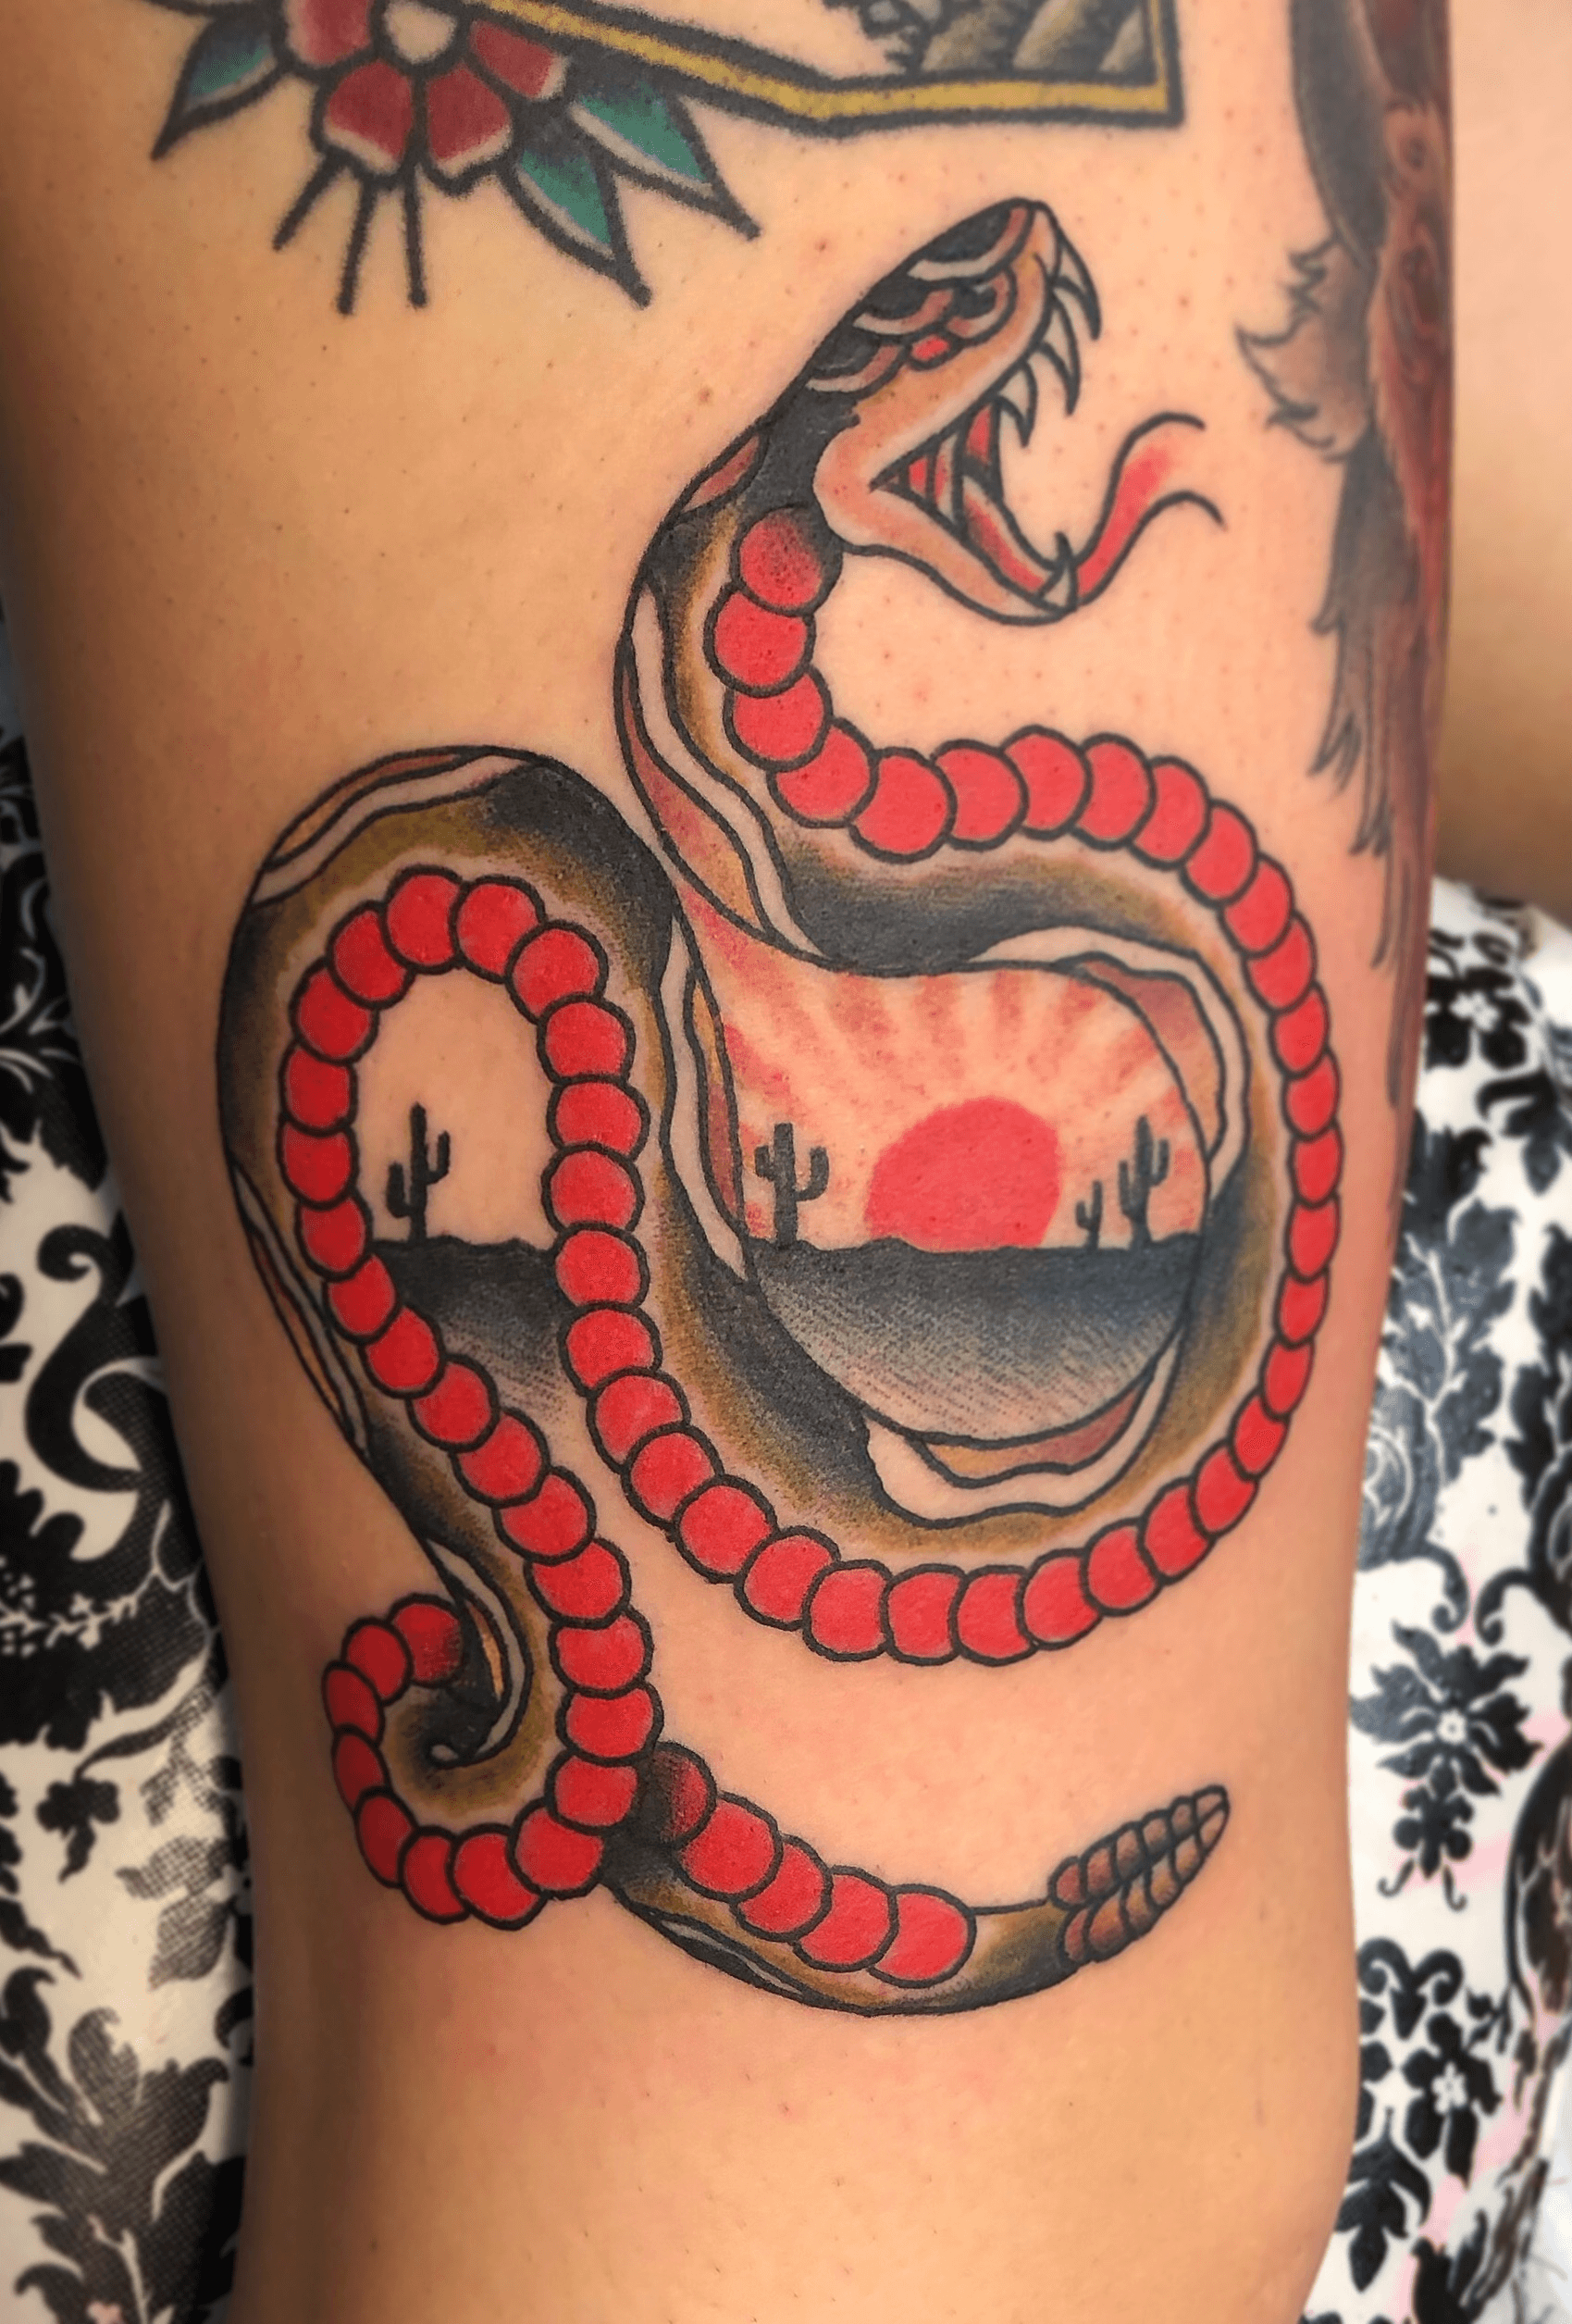 60 Rattlesnake Tattoo Designs For Men  Manly Ink Ideas  Traditional snake  tattoo Snake tattoo design Traditional tattoo